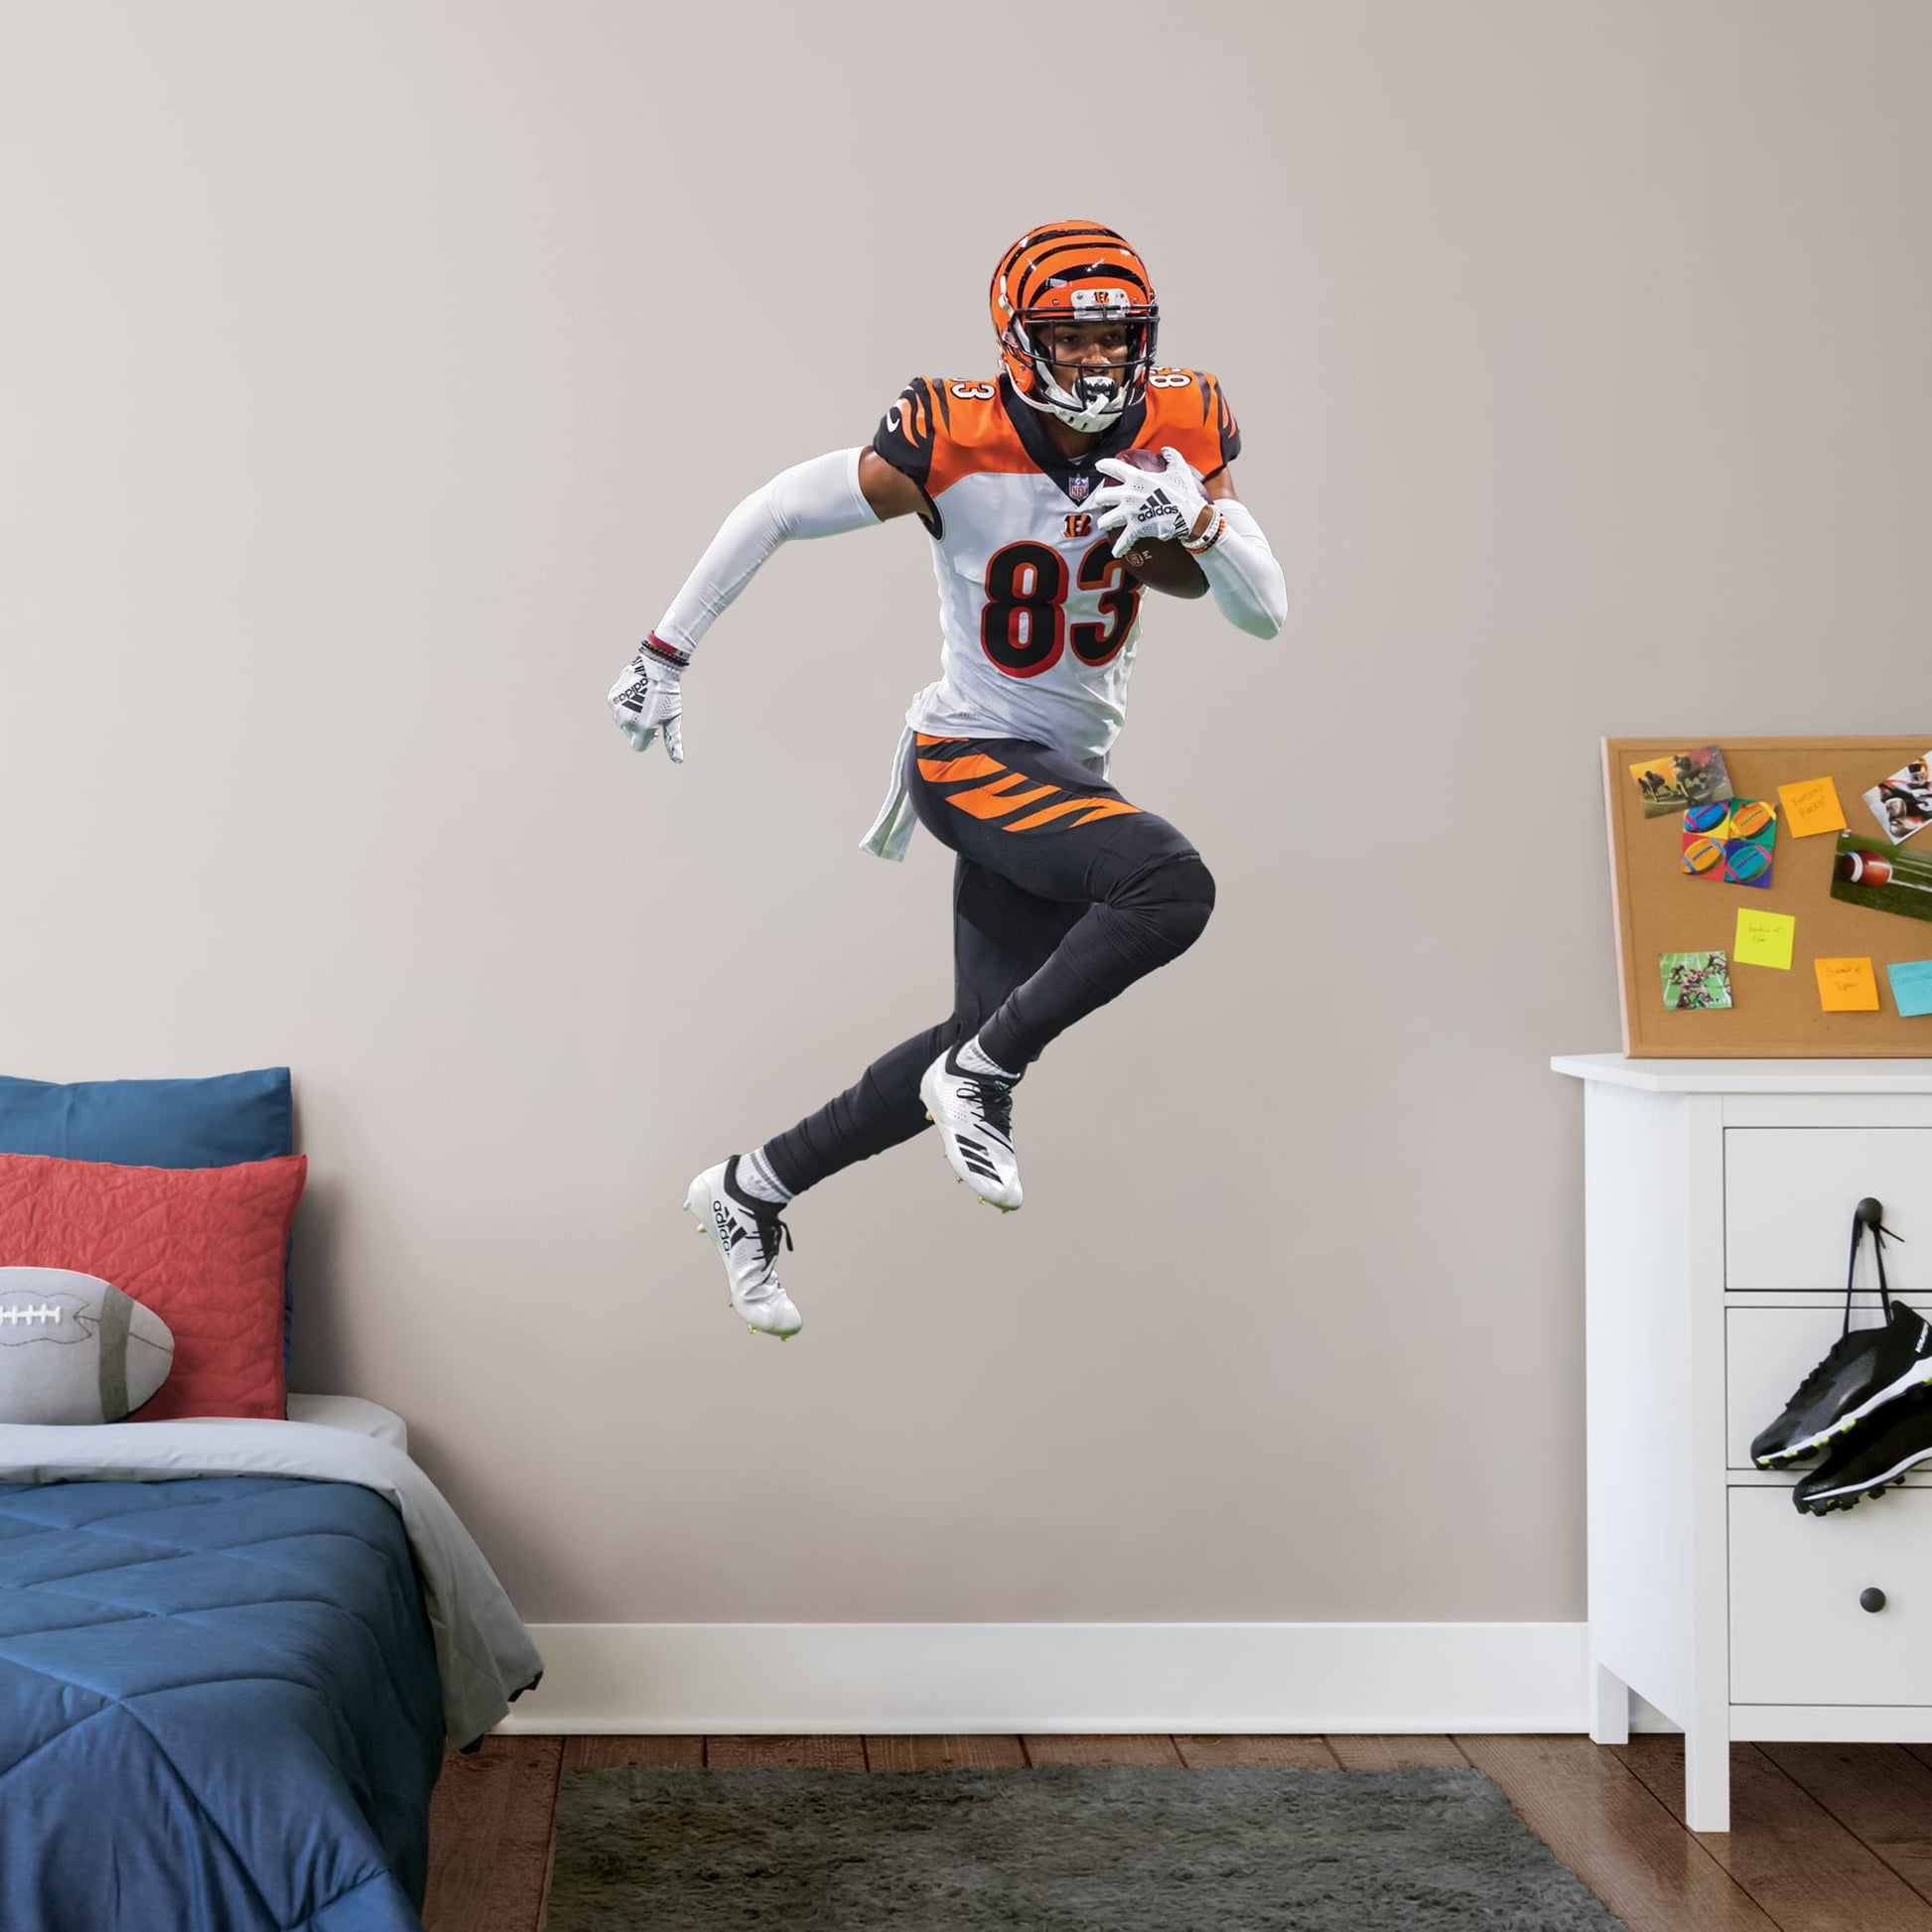 Giant Athlete + 2 Decals (31"W x 51"H) Bring the action of the NFL into your home with a wall decal of Tyler Boyd! High quality, durable, and tear resistant, you'll be able to stick and move it as many times as you want to create the ultimate football experience in any room!